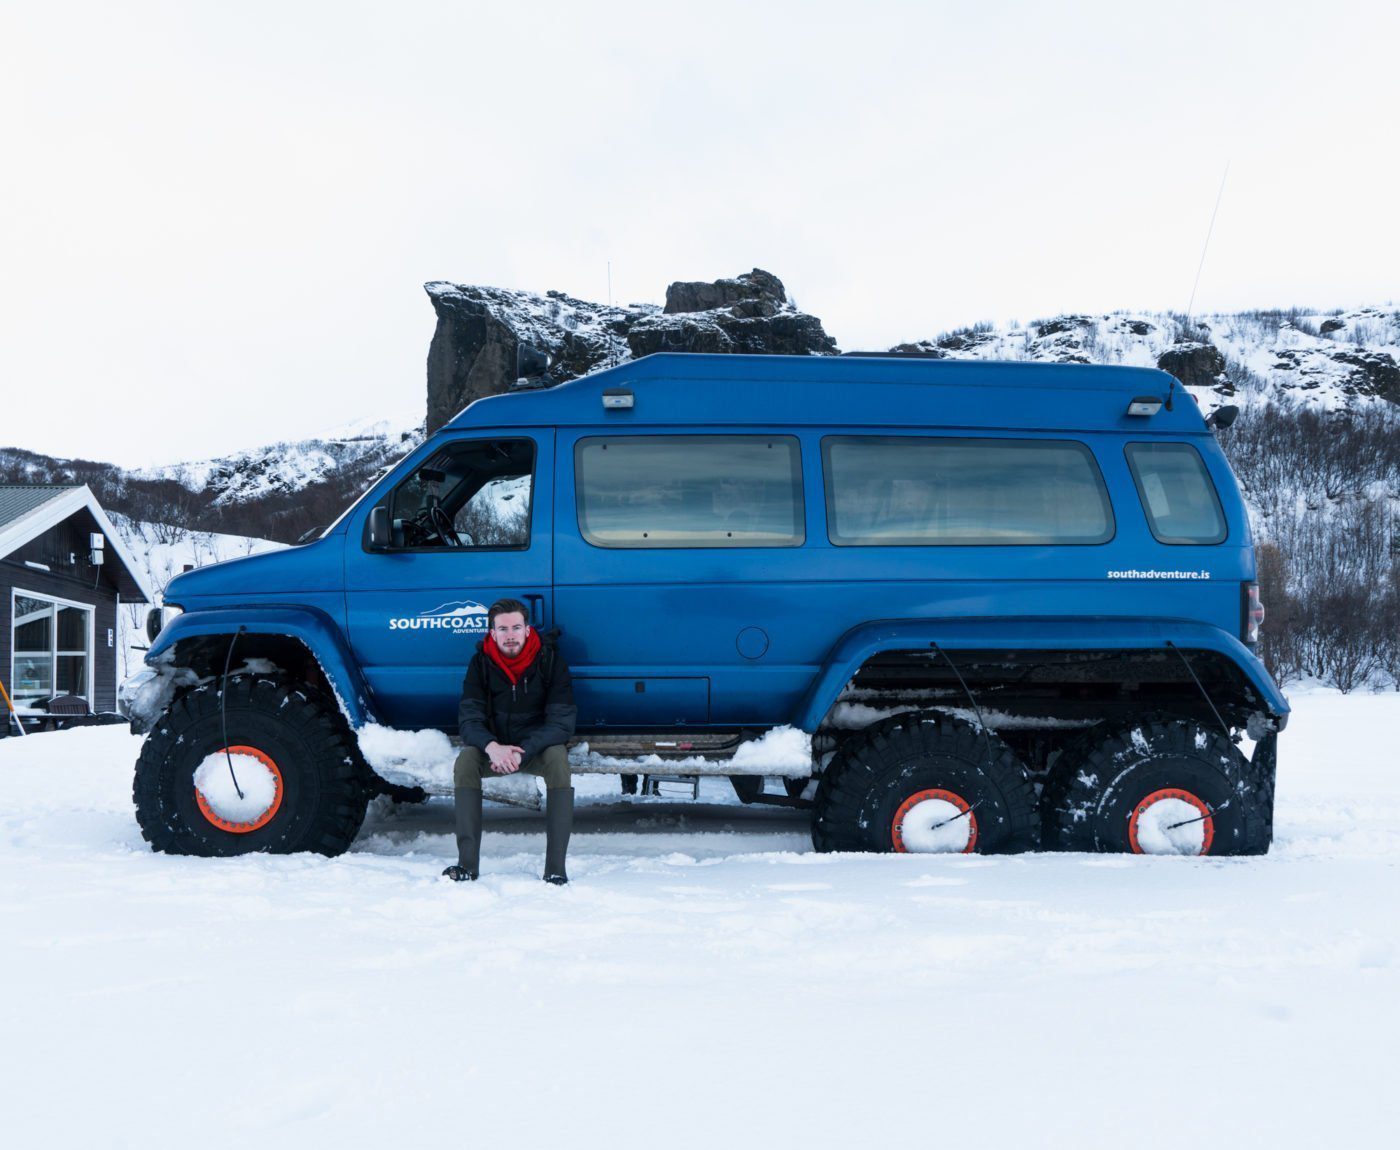 Super jeep tour in Iceland with Southcoast Adventure